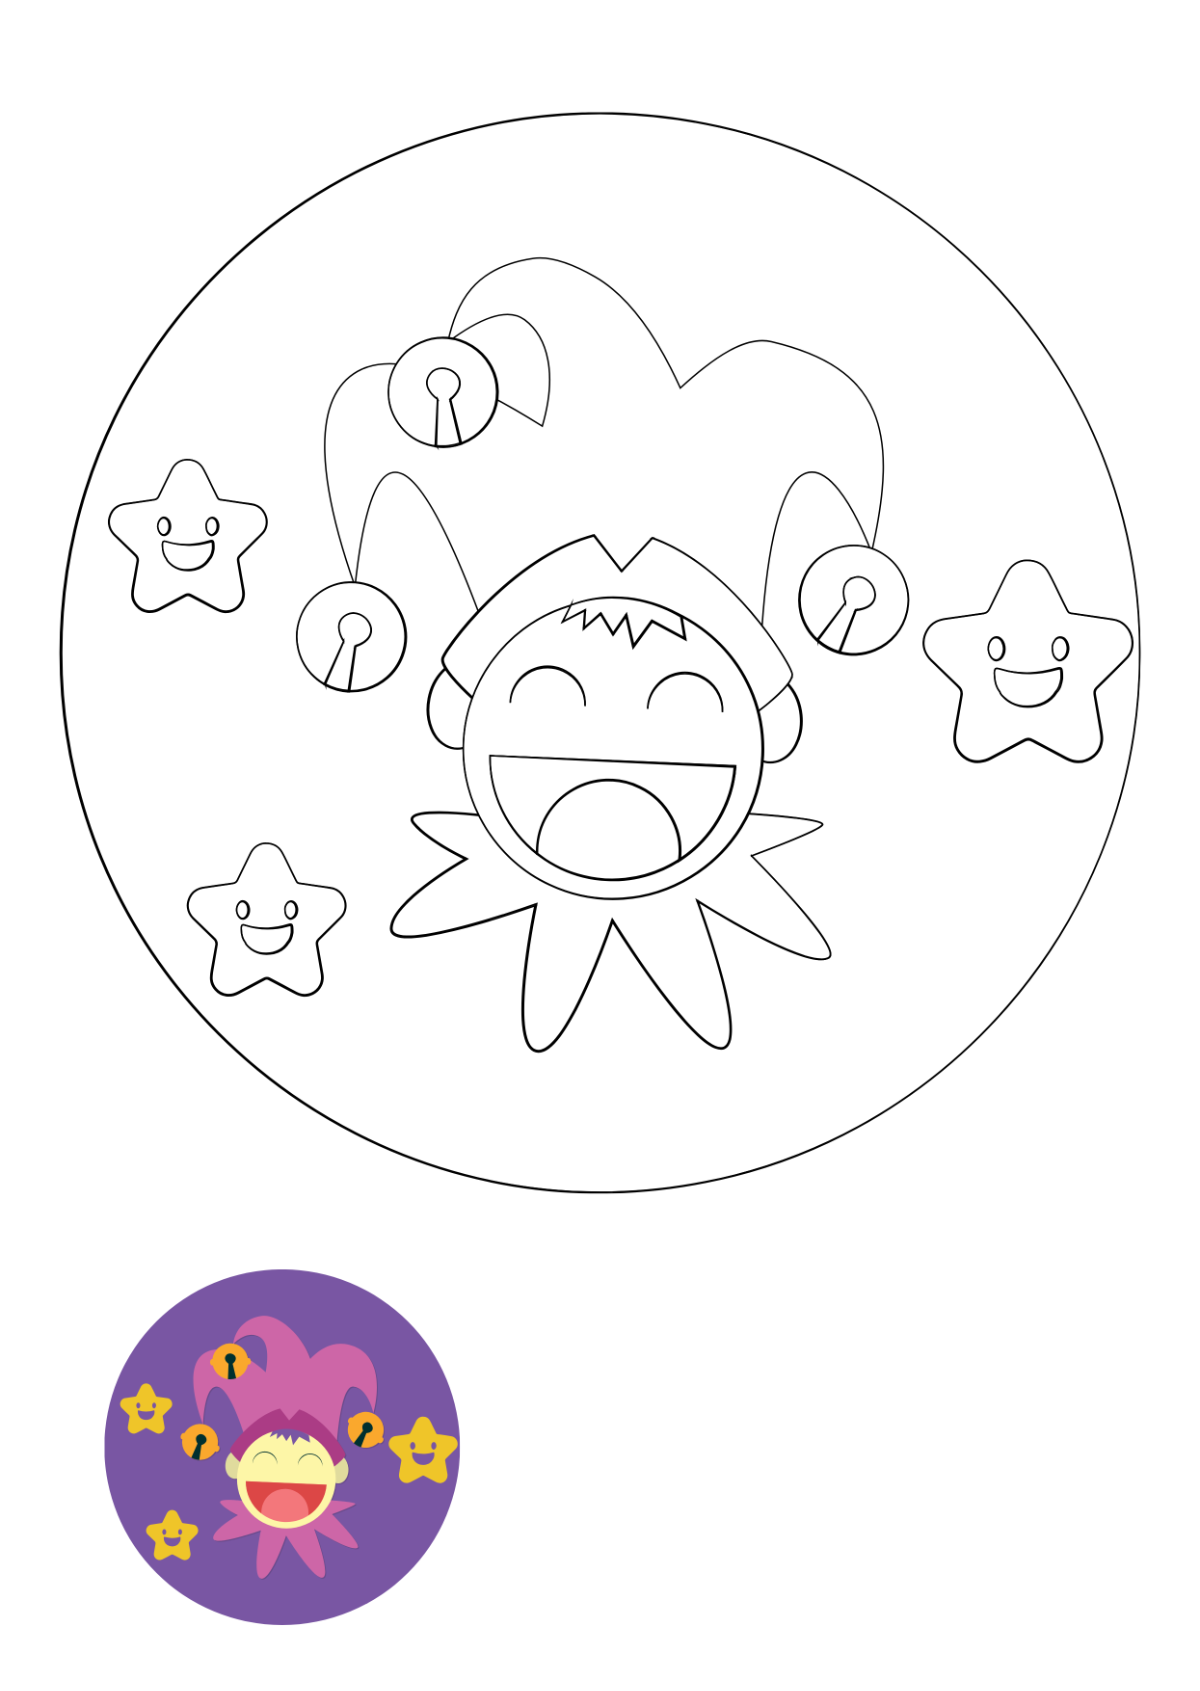 Free Cute April Fools’ Day Coloring Page Template